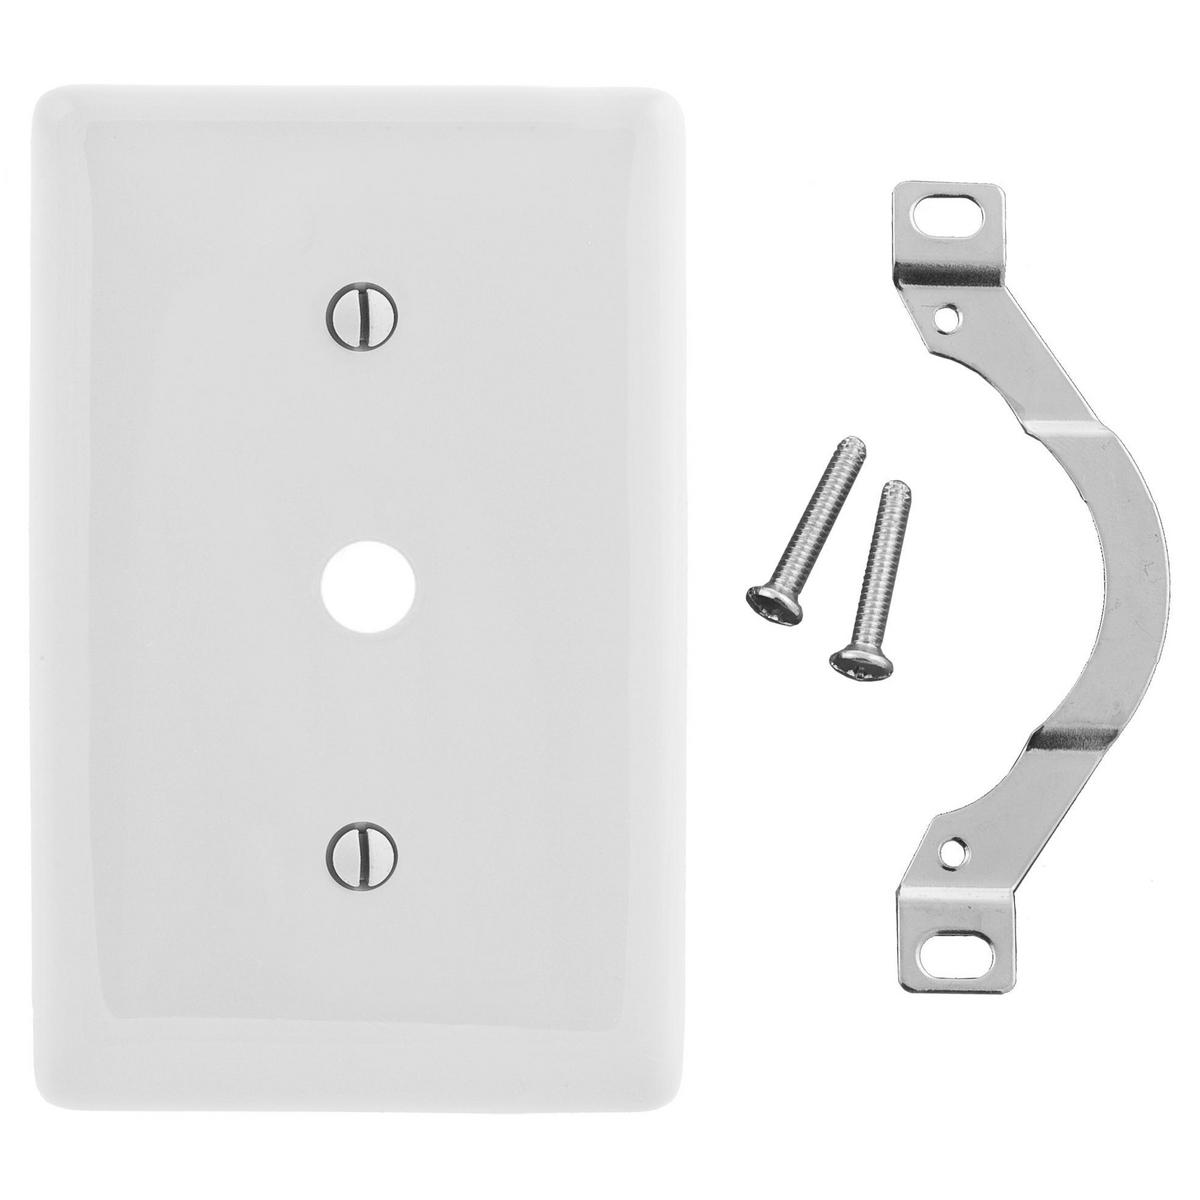 Hubbell NP12W Wallplates and Box Covers, Wallplate, Nylon, 1-Gang, .406" Opening, Strap Mount, Light Almond  ; Reinforcement ribs for extra strength ; High-impact, self-extinguishing nylon material ; Captive screw feature holds mounting screw in place ; Standard Size i